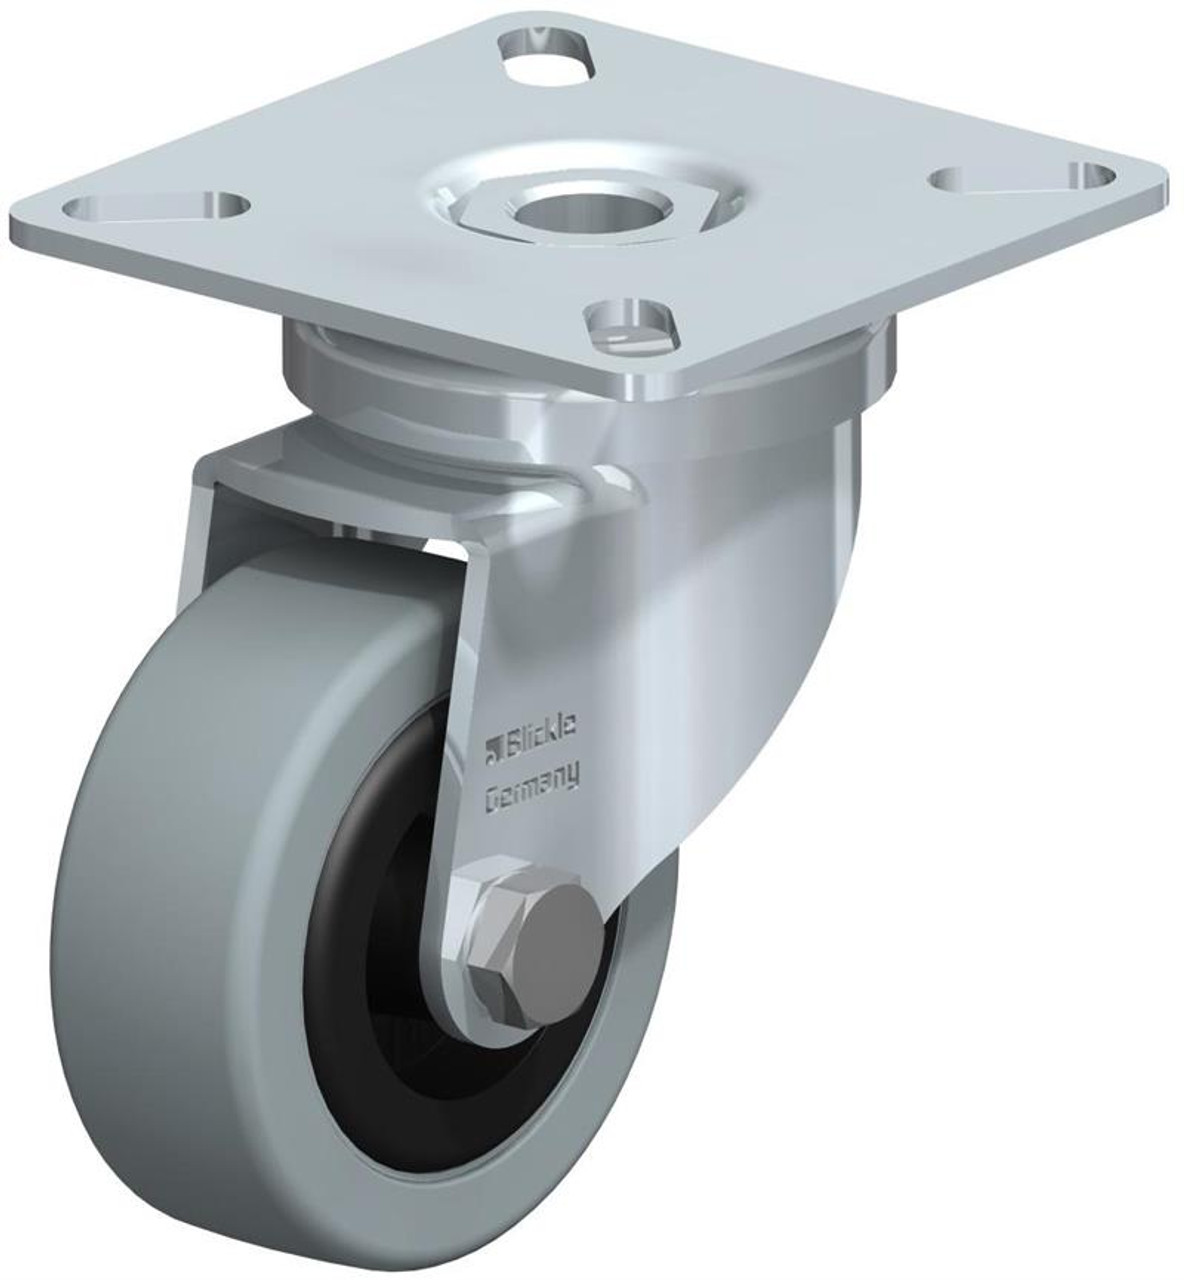 LPA-VPA 50K Blickle 50mm swivel caster with top plate